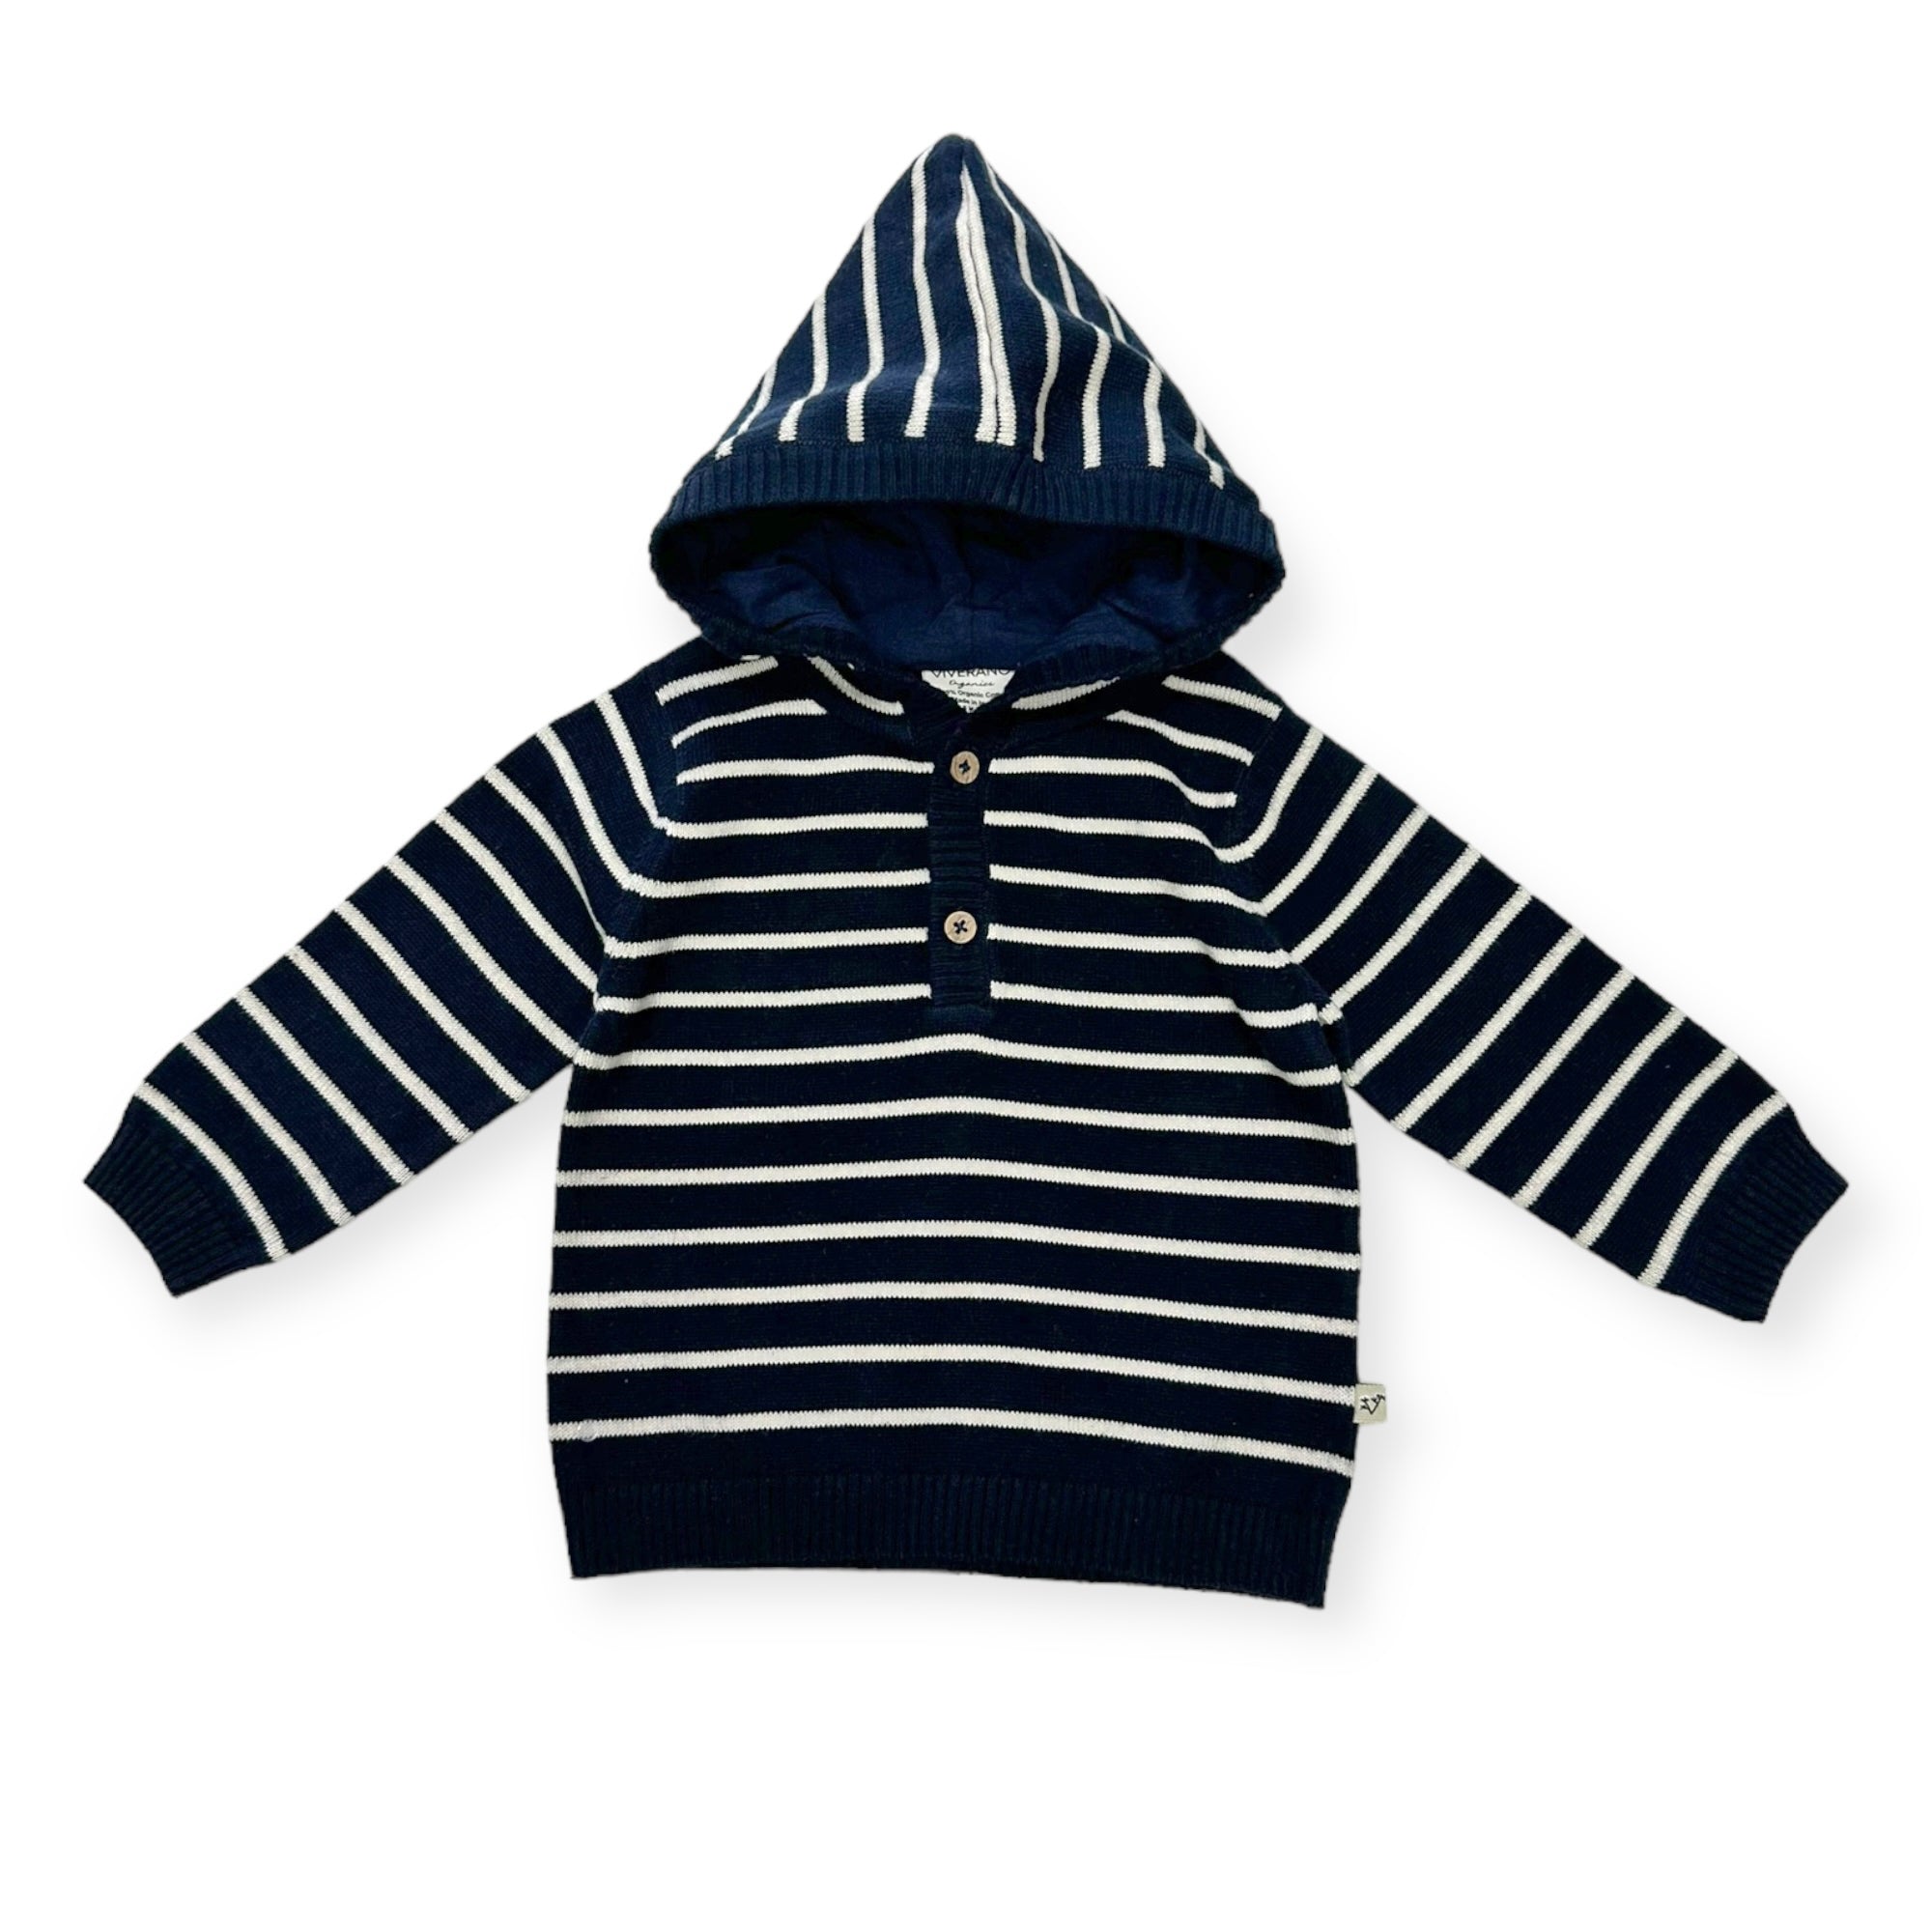 Stripe Hooded Sweater Knit Baby Pullover 